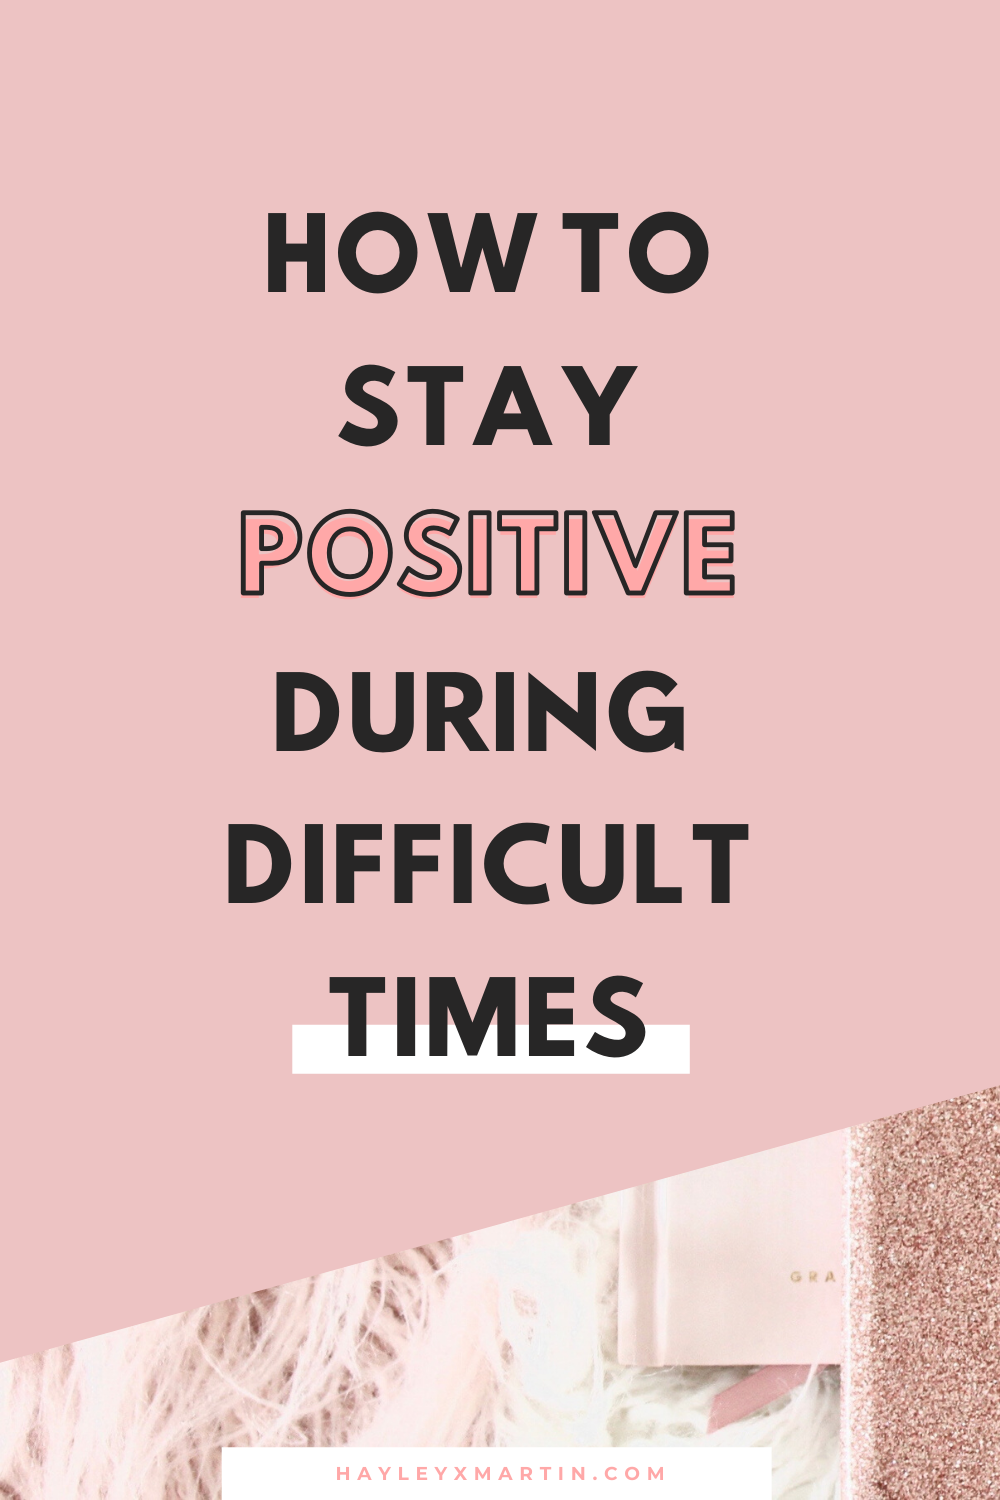 how to stay positive during difficult times | hayleyxmartin